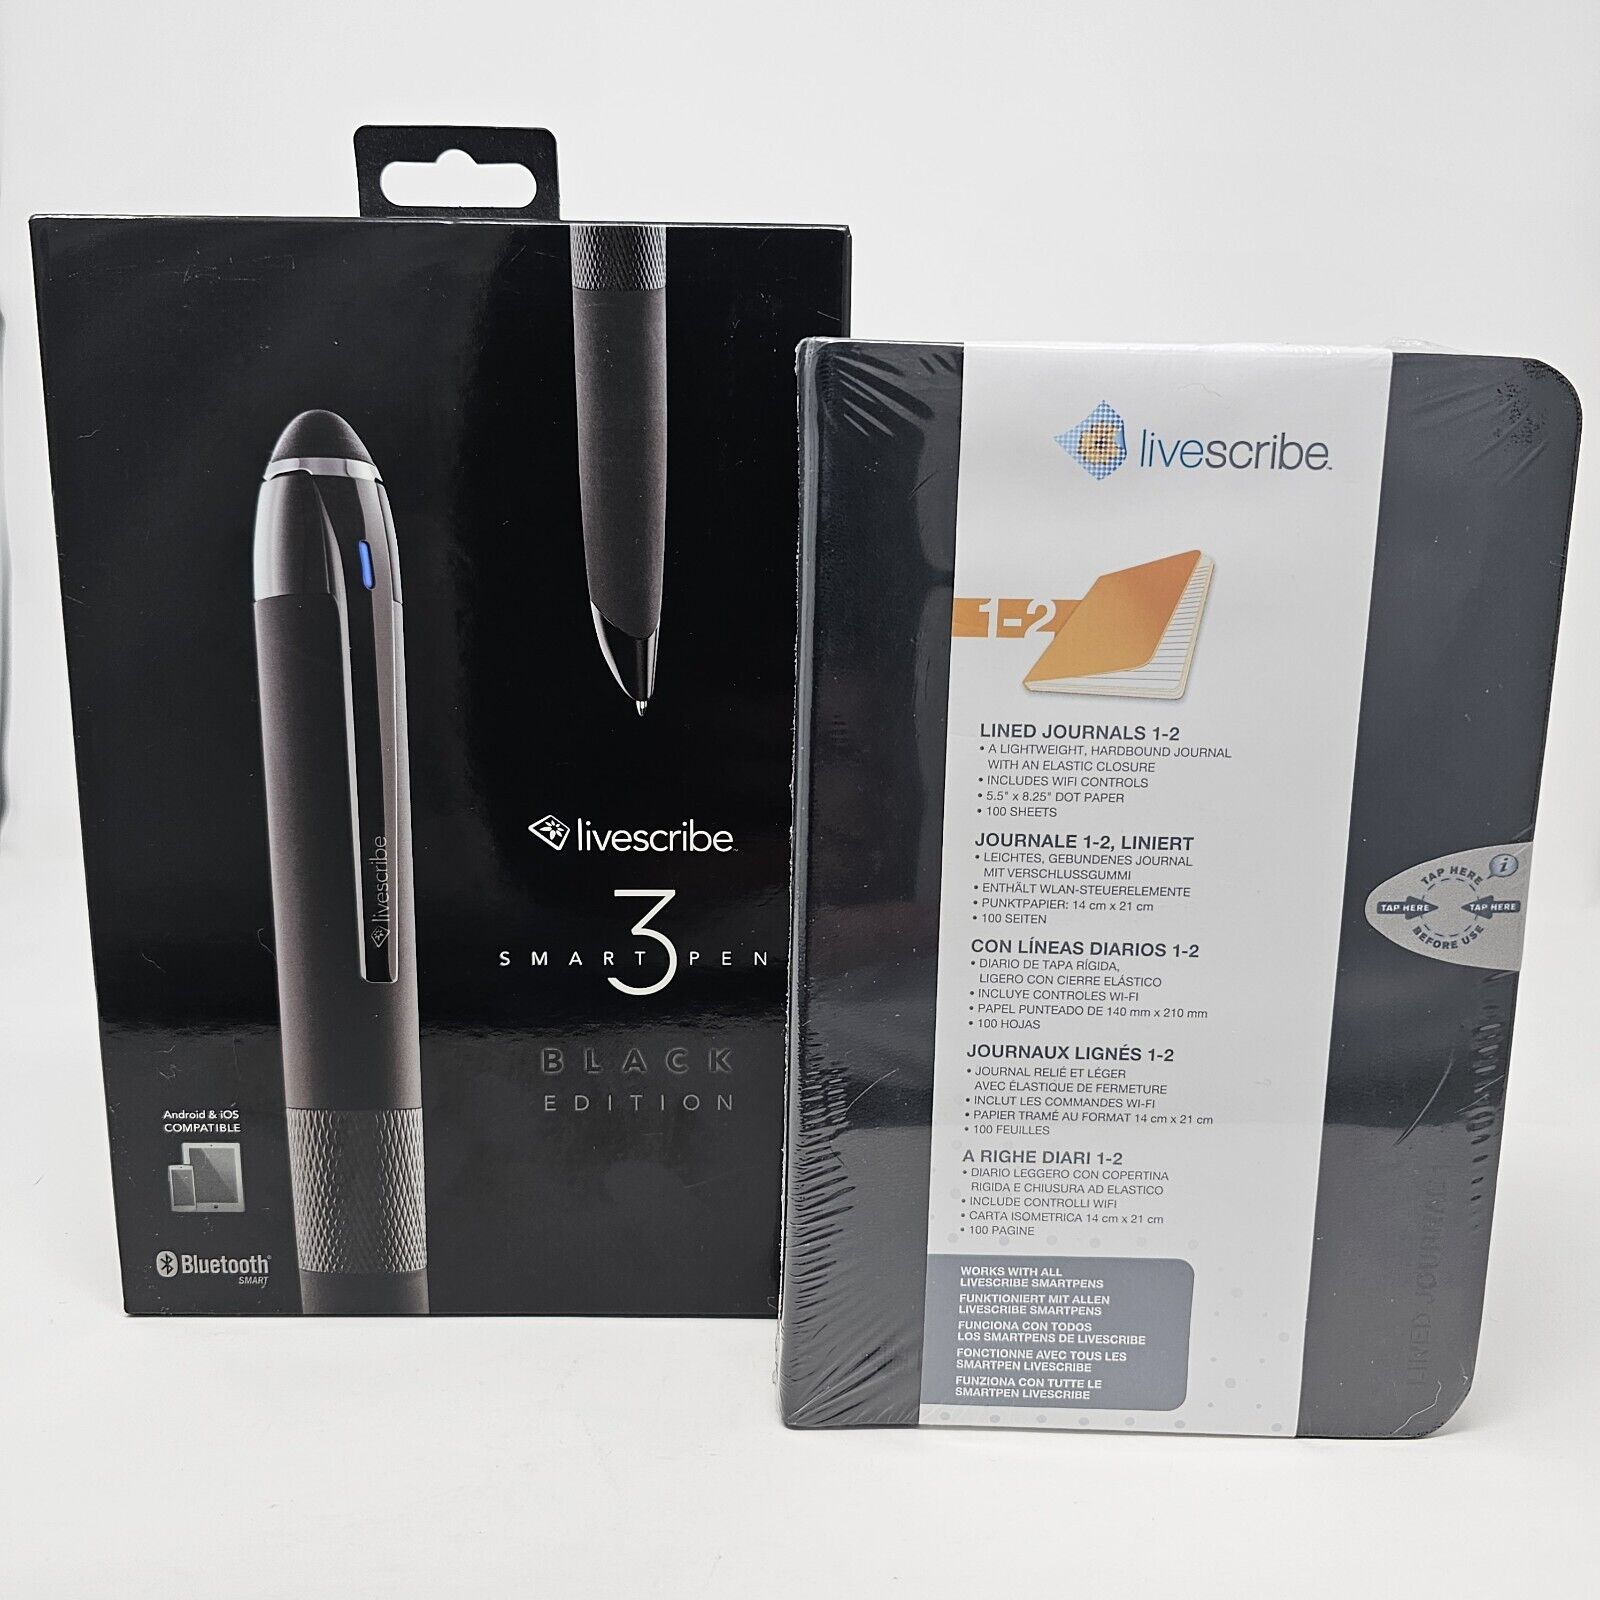 Livescribe 3 Smart Pen Black Edition and Lined Journals 1-2 New Sealed